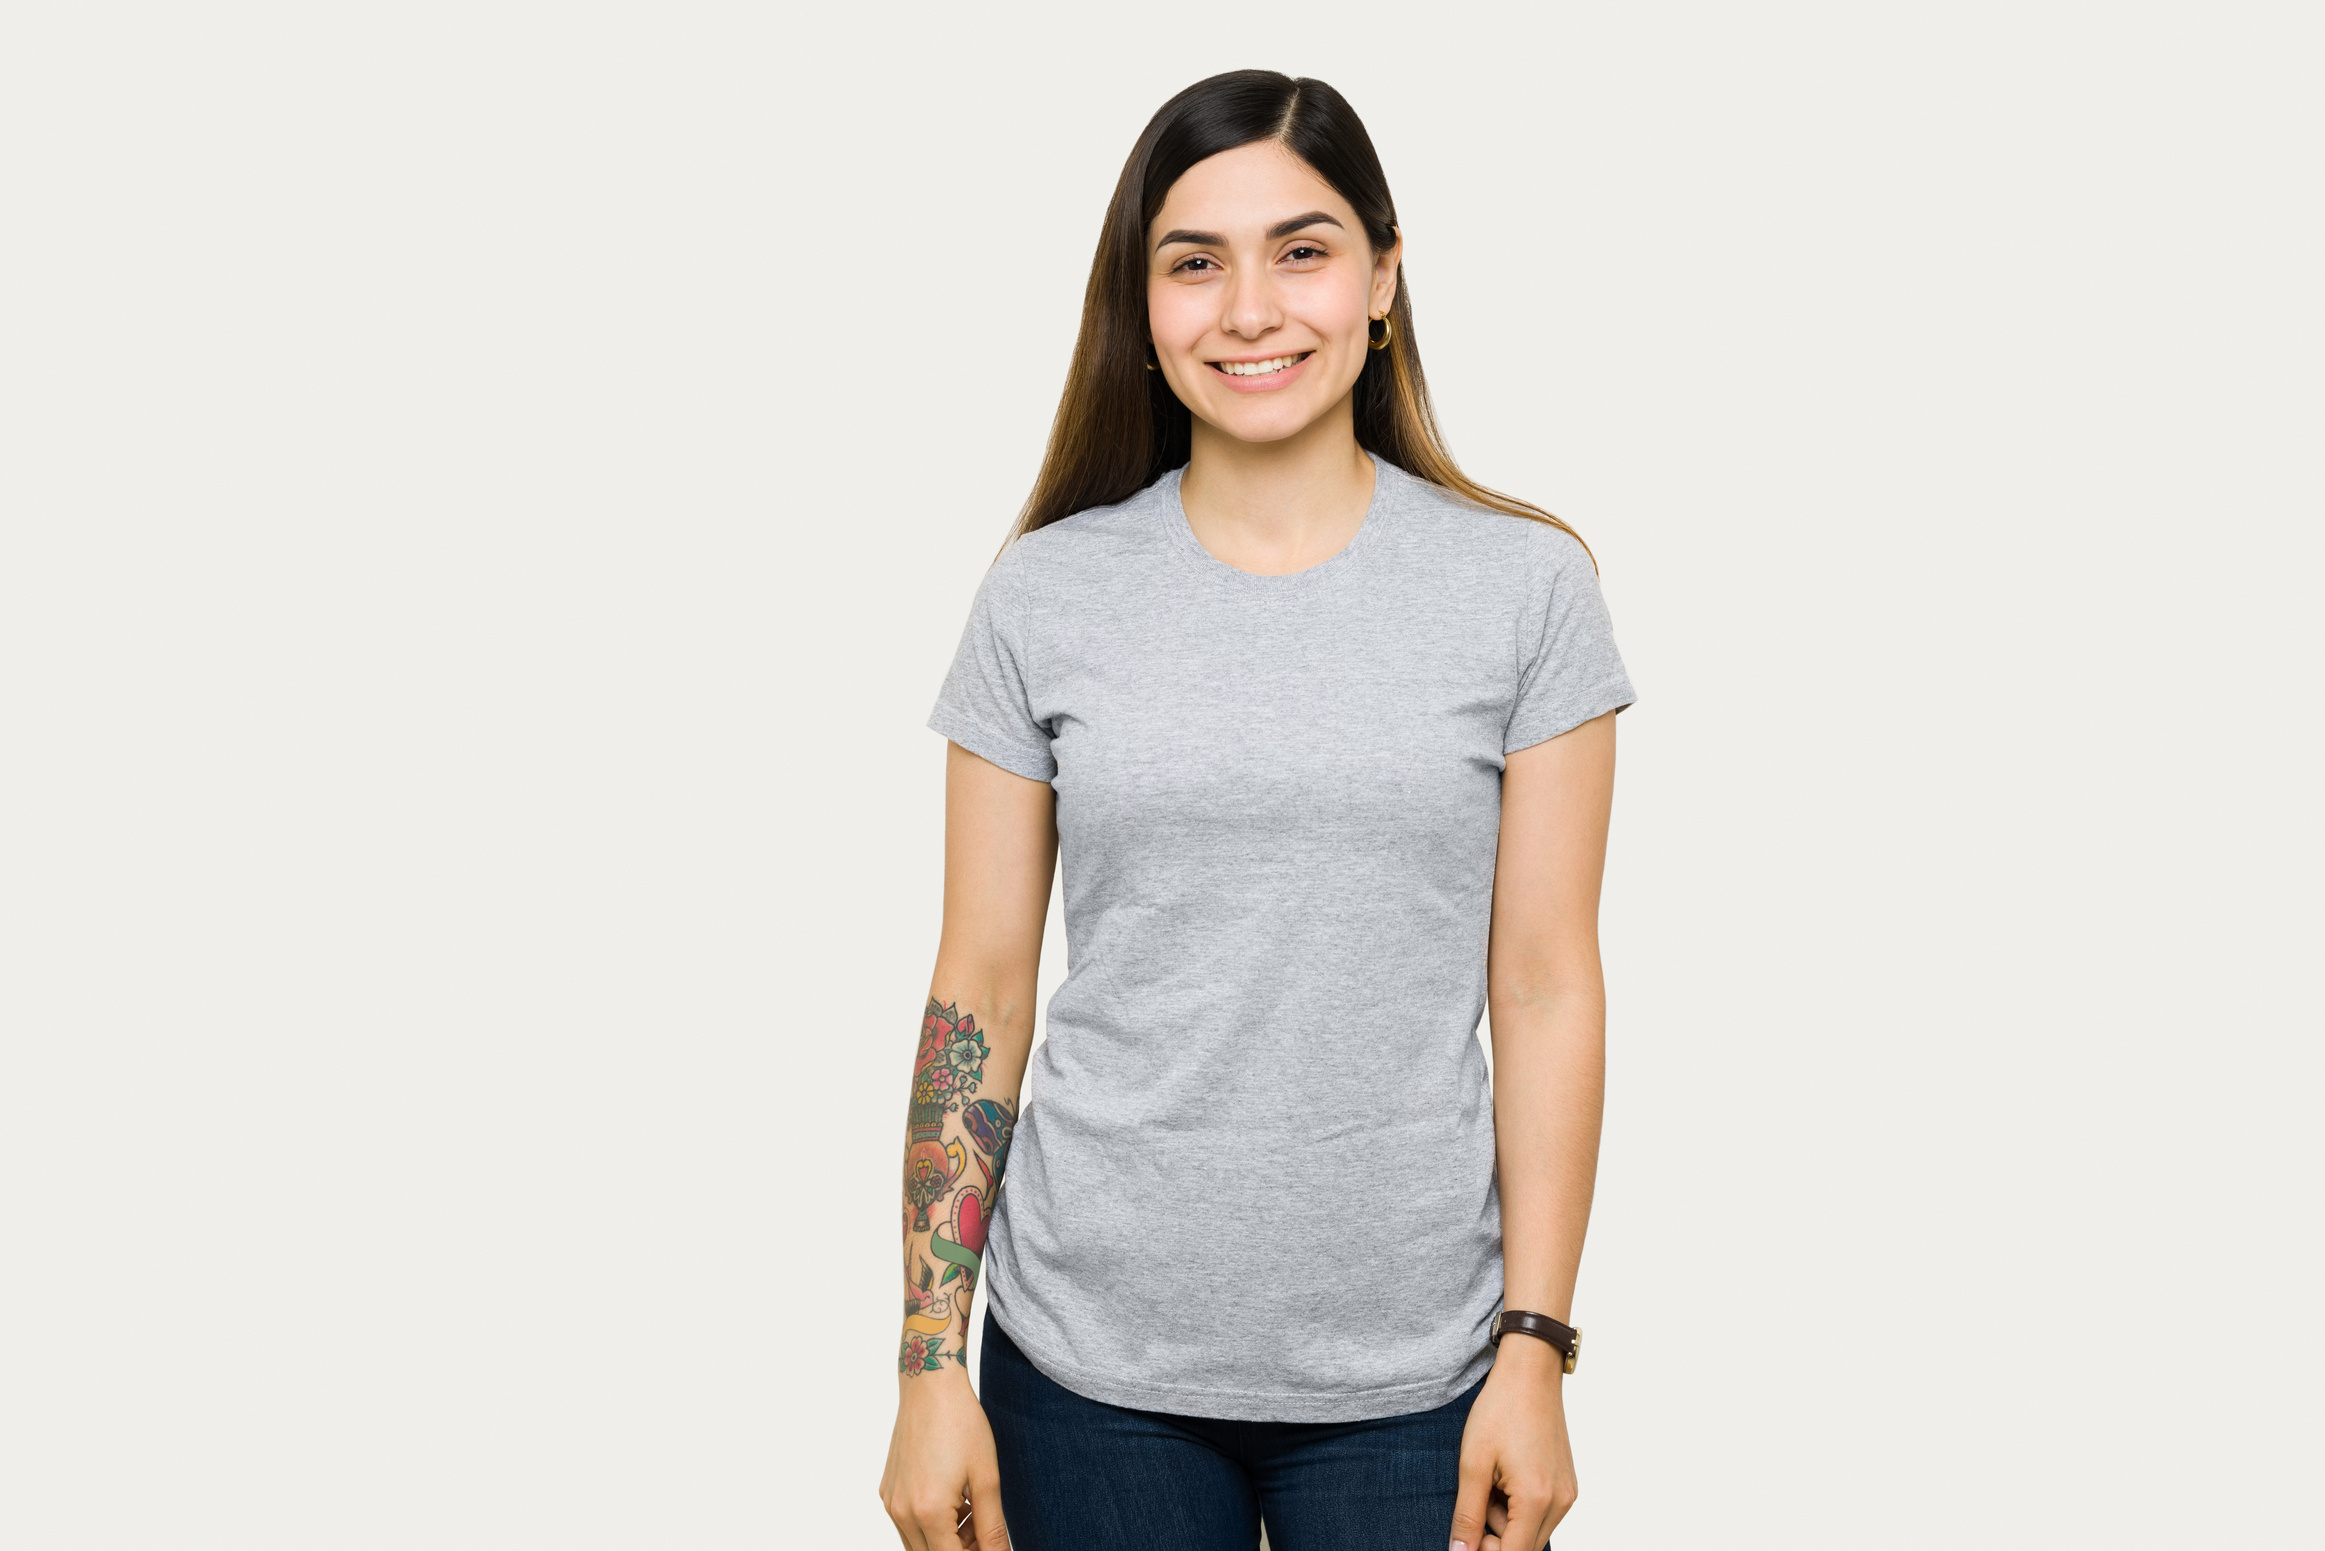 Portrait of a latin woman with a mock up gray t-shirt